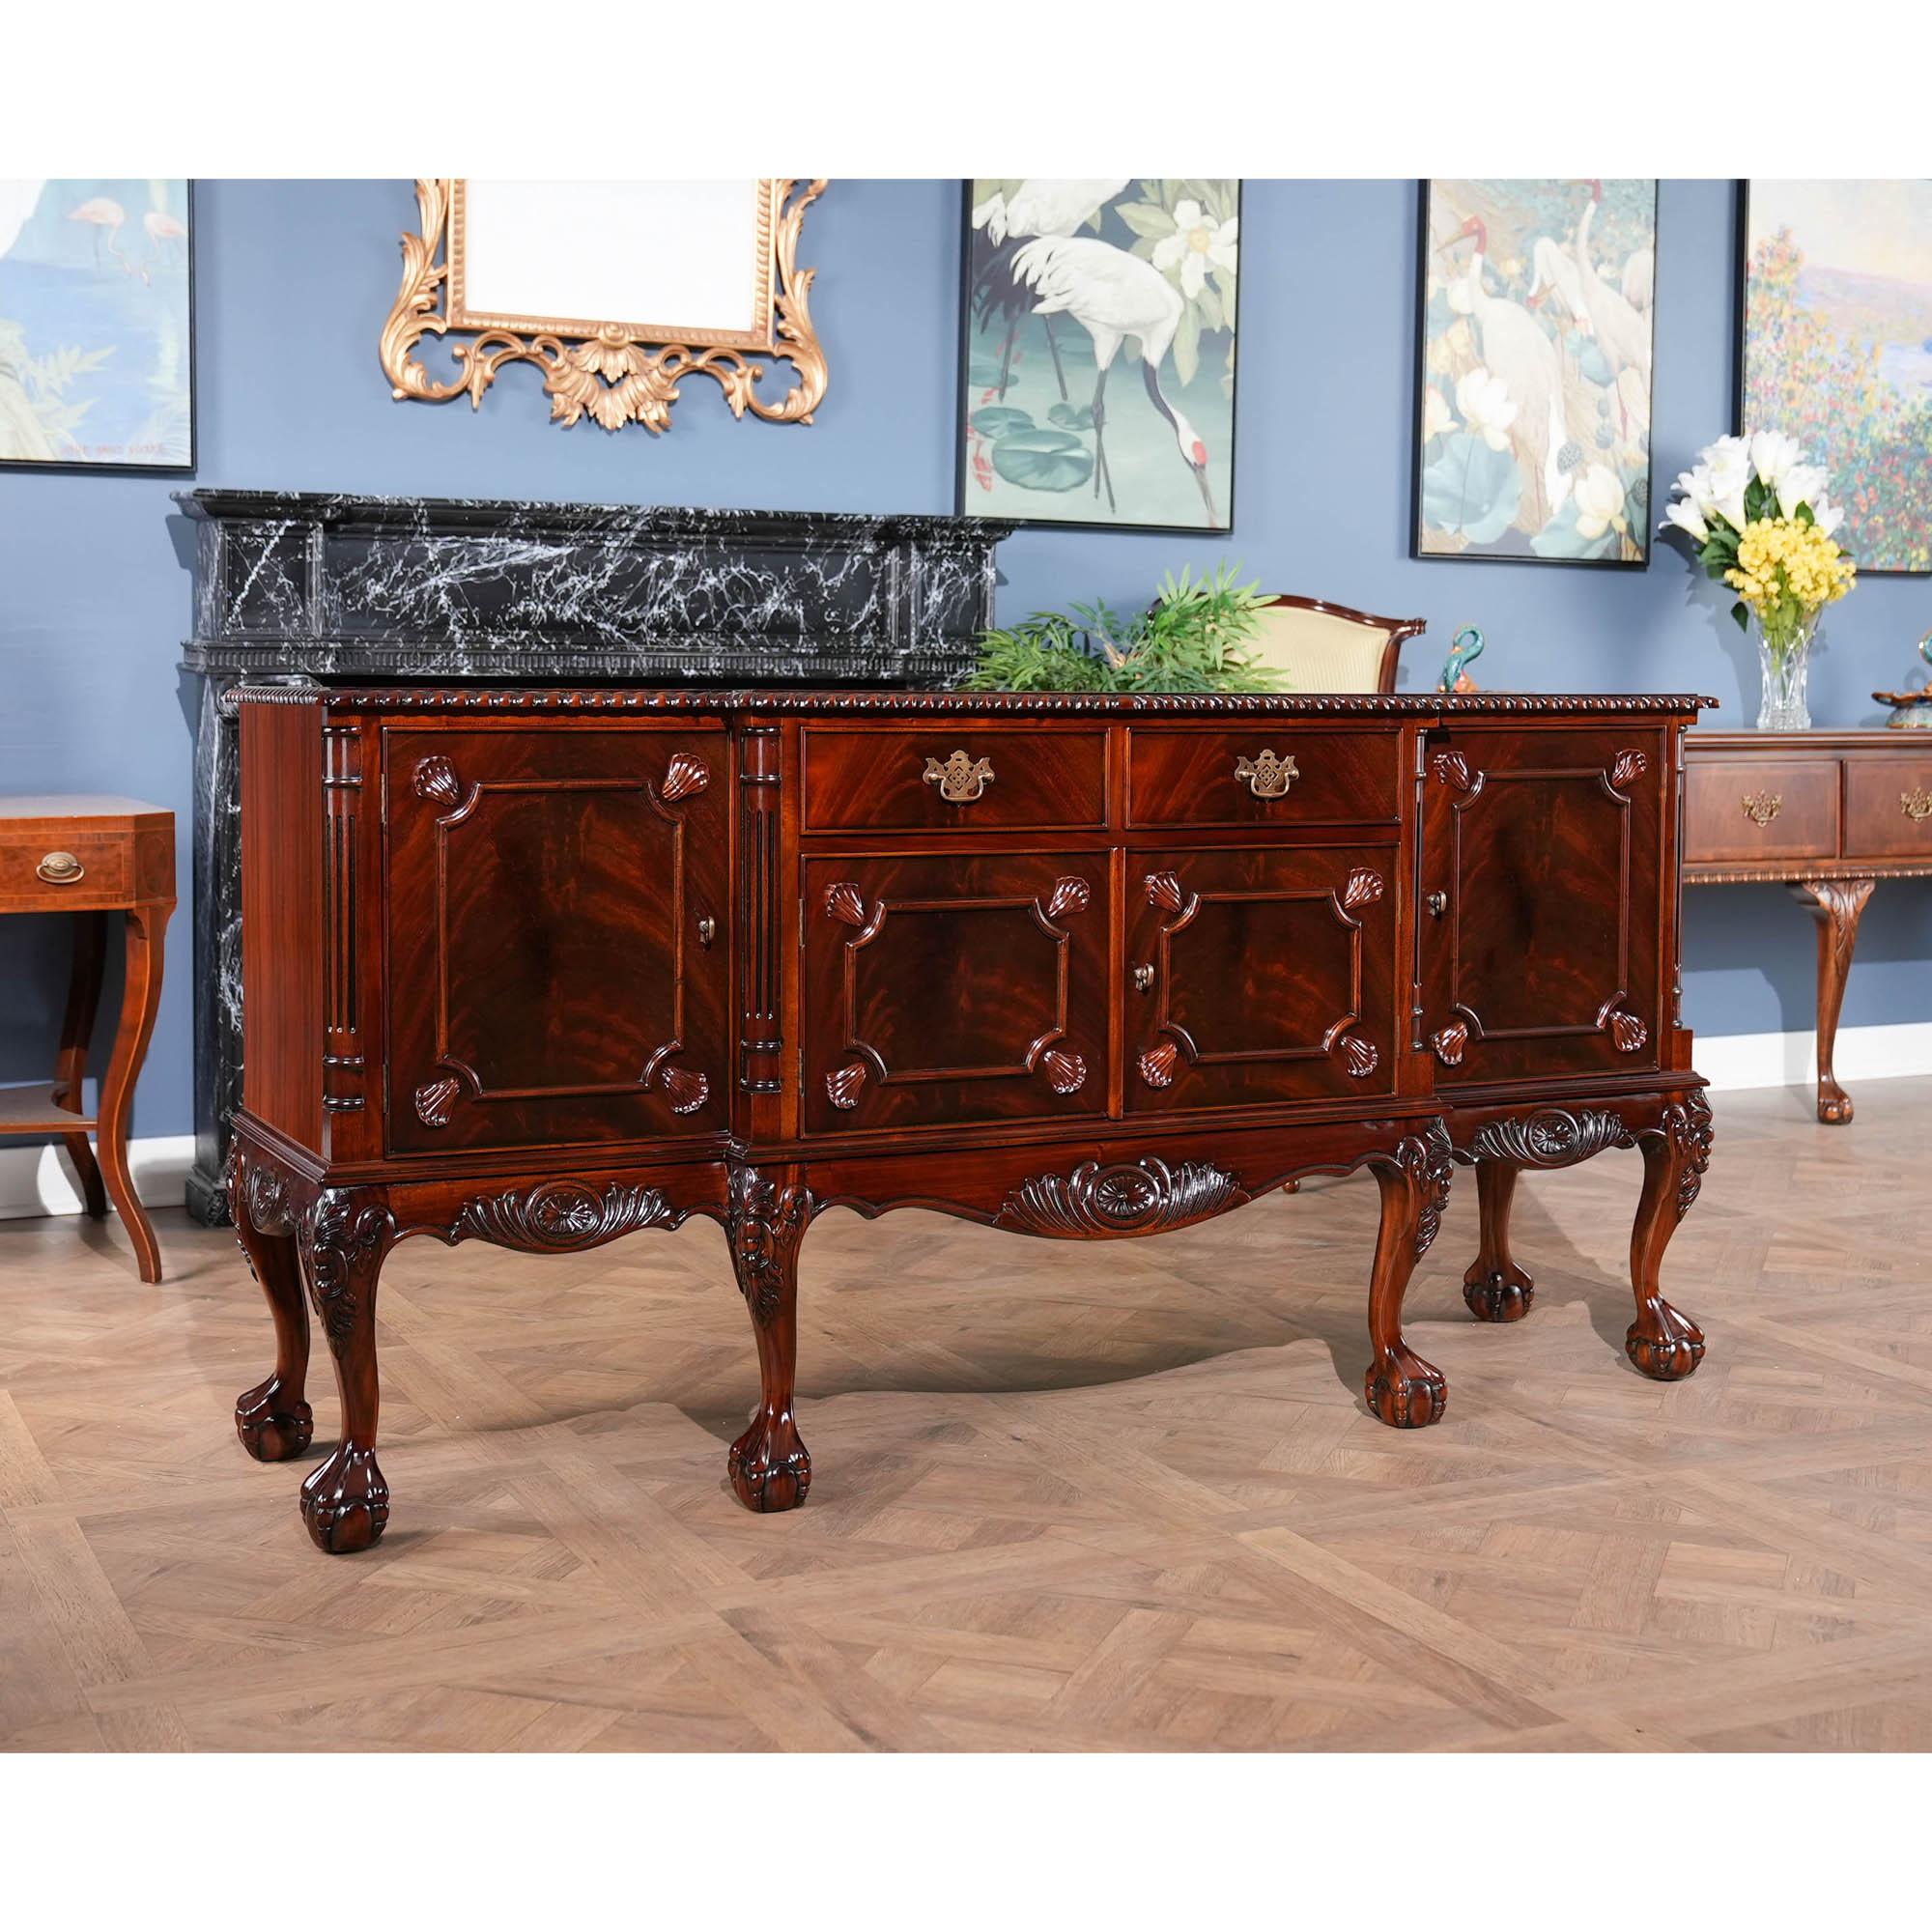 This Chippendale Mahogany Breakfront is produced in two sections to make moving and installation of the sections easier. The top section of the Chippendale Mahogany Breakfront features a pierced carved crest with removable finial. The four doors